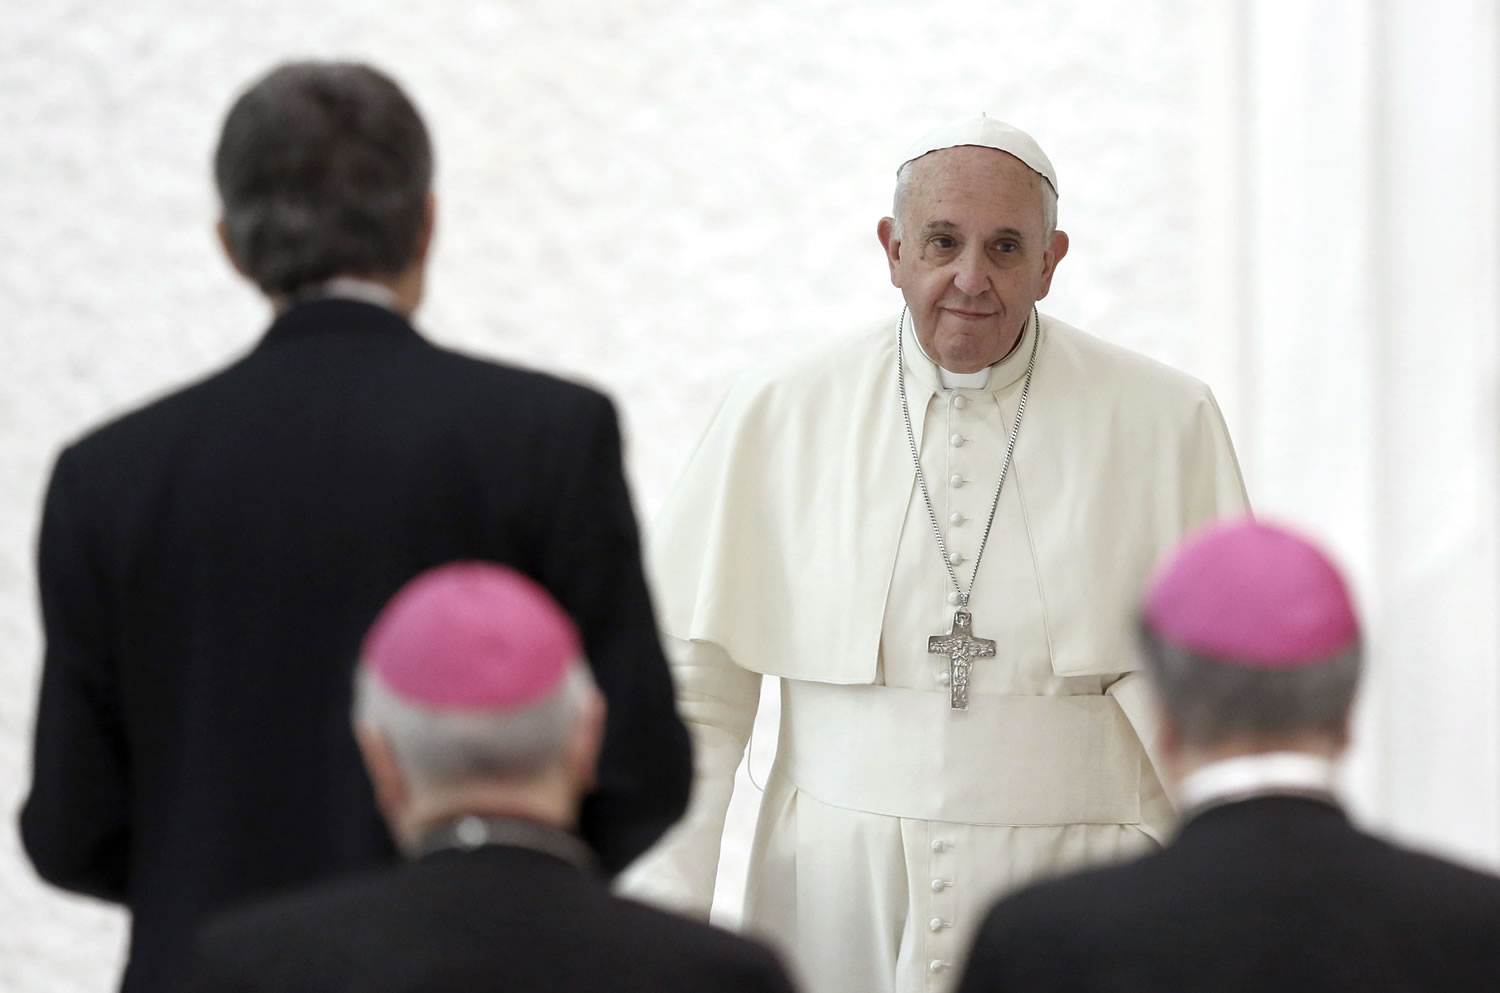 Pope Francis
Wrote letters to Obama, Cuba's Castro